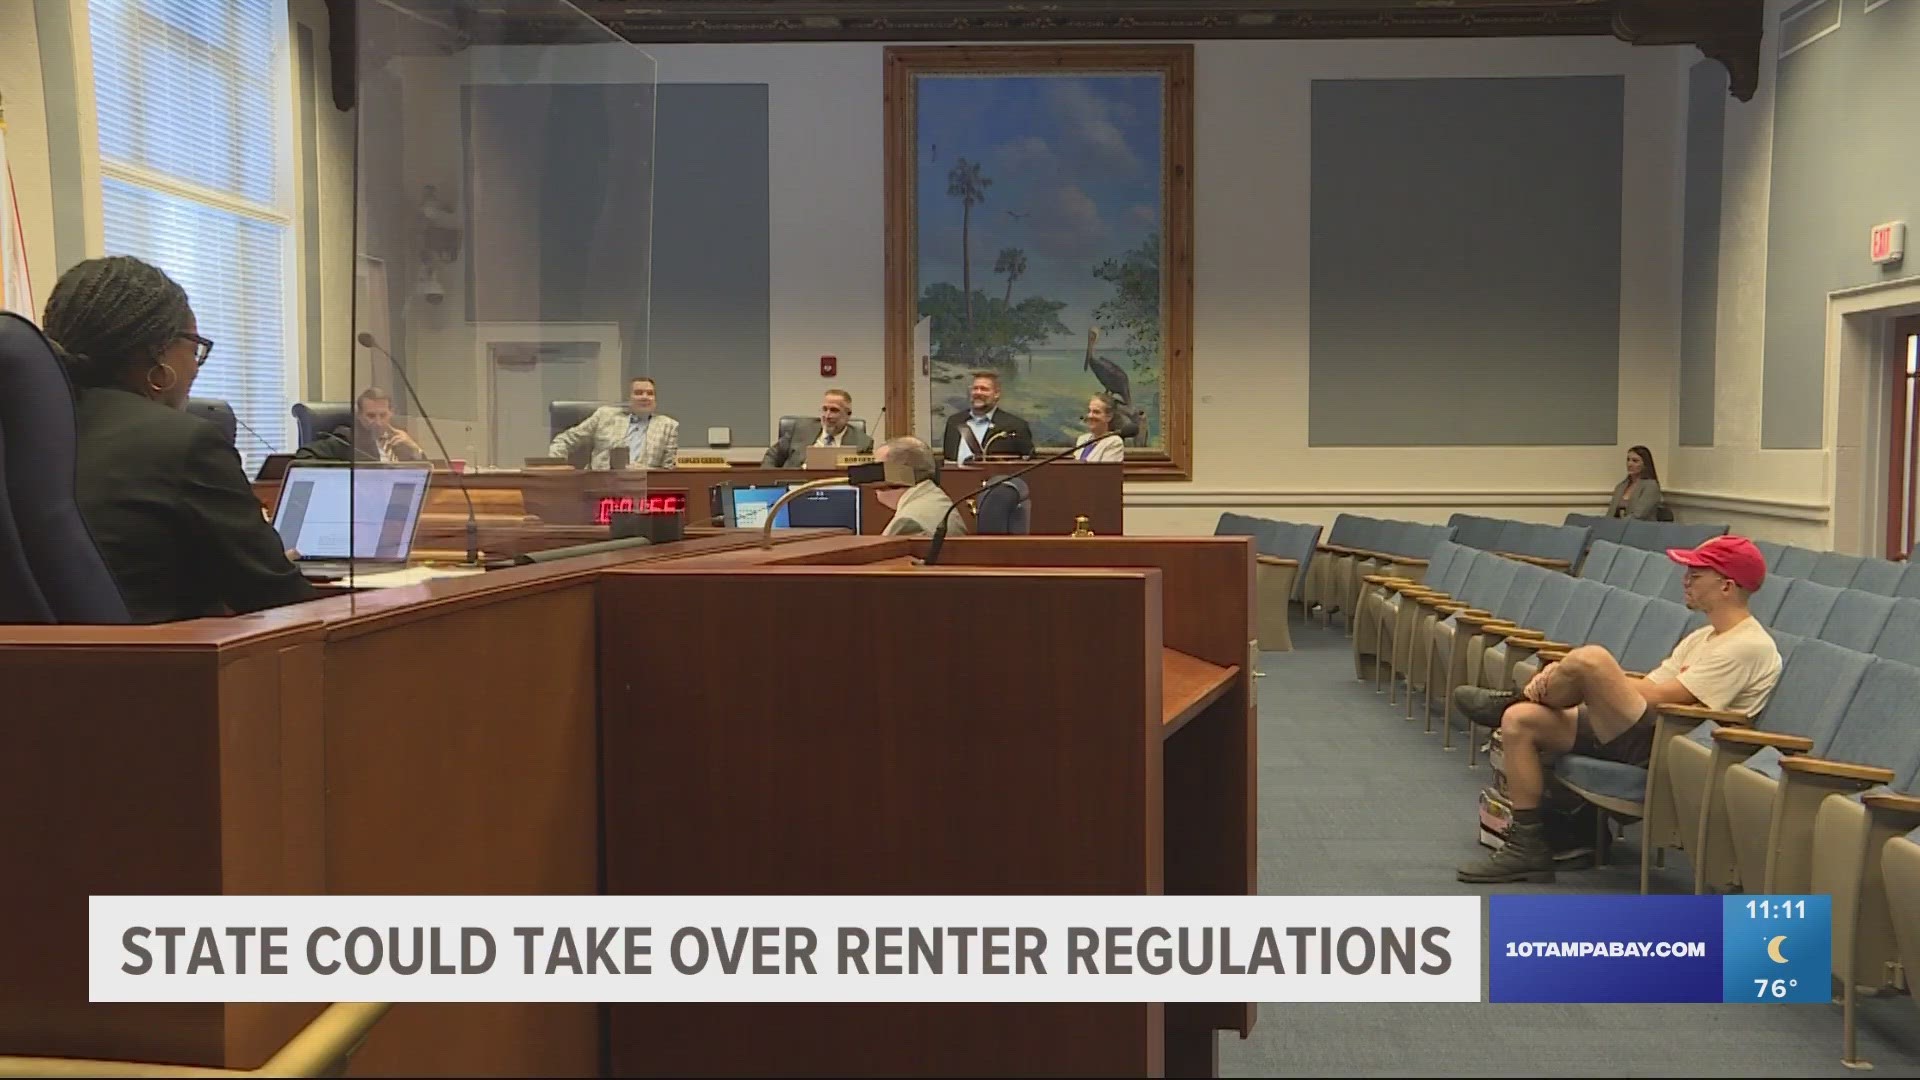 Two bills are working their way through the Florida Legislature that would permit the state to "supersede" local control of tenant and renter regulations.